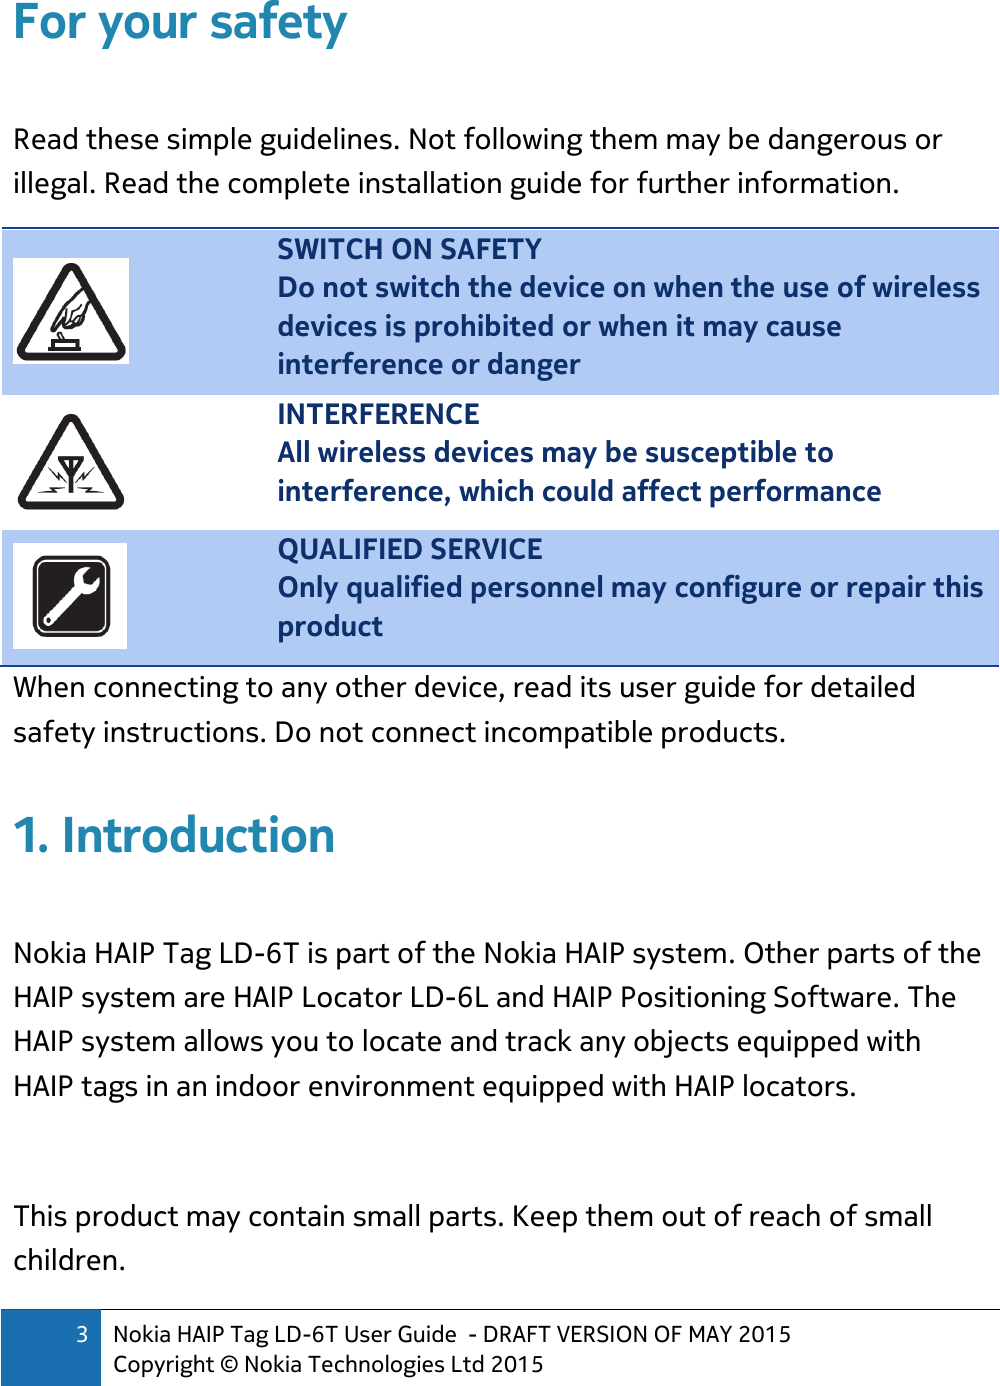 3 Nokia HAIP Tag LD-6T User Guide  - DRAFT VERSION OF MAY 2015 Copyright © Nokia Technologies Ltd 2015  For your safety  Read these simple guidelines. Not following them may be dangerous or illegal. Read the complete installation guide for further information.  SWITCH ON SAFETY Do not switch the device on when the use of wireless devices is prohibited or when it may cause interference or danger  INTERFERENCE All wireless devices may be susceptible to interference, which could affect performance  QUALIFIED SERVICE Only qualified personnel may configure or repair this product When connecting to any other device, read its user guide for detailed safety instructions. Do not connect incompatible products. 1. Introduction  Nokia HAIP Tag LD-6T is part of the Nokia HAIP system. Other parts of the HAIP system are HAIP Locator LD-6L and HAIP Positioning Software. The HAIP system allows you to locate and track any objects equipped with HAIP tags in an indoor environment equipped with HAIP locators.  This product may contain small parts. Keep them out of reach of small children.  